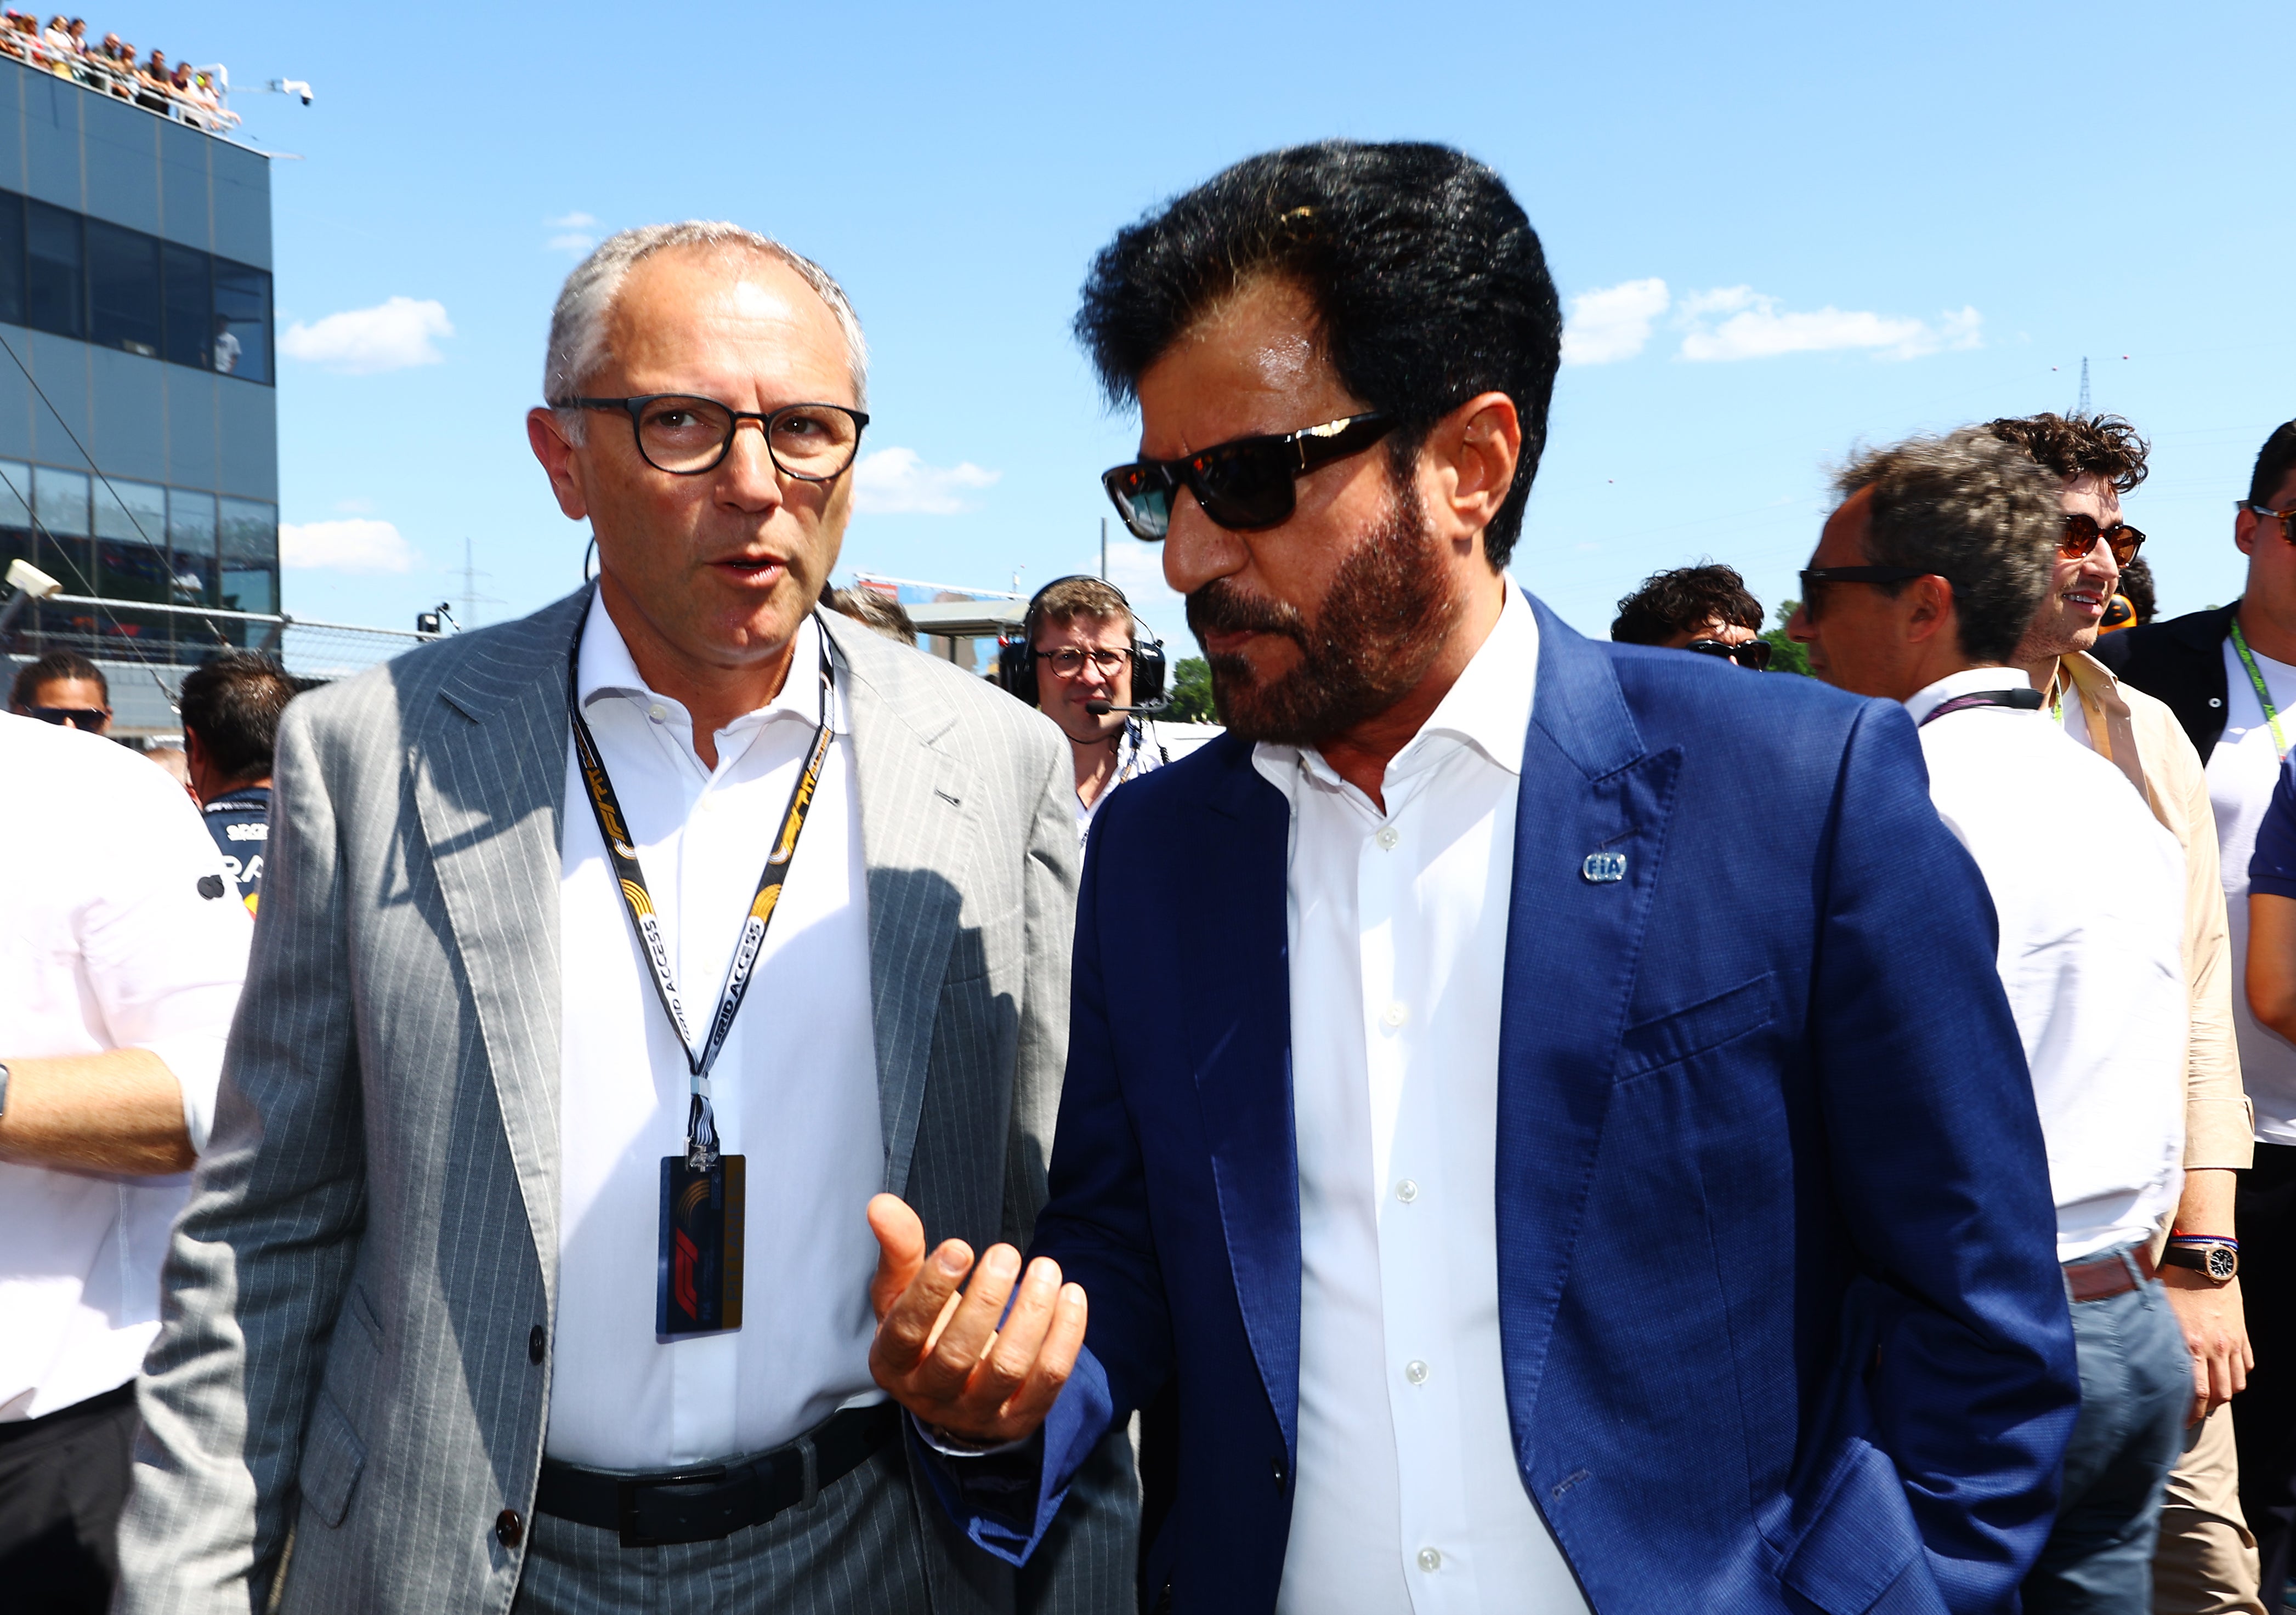 The letter from Massa’s lawyers was sent to F1 boss Stefano Domenicali (left) and FIA president Mohammed Ben Sulayem (right)